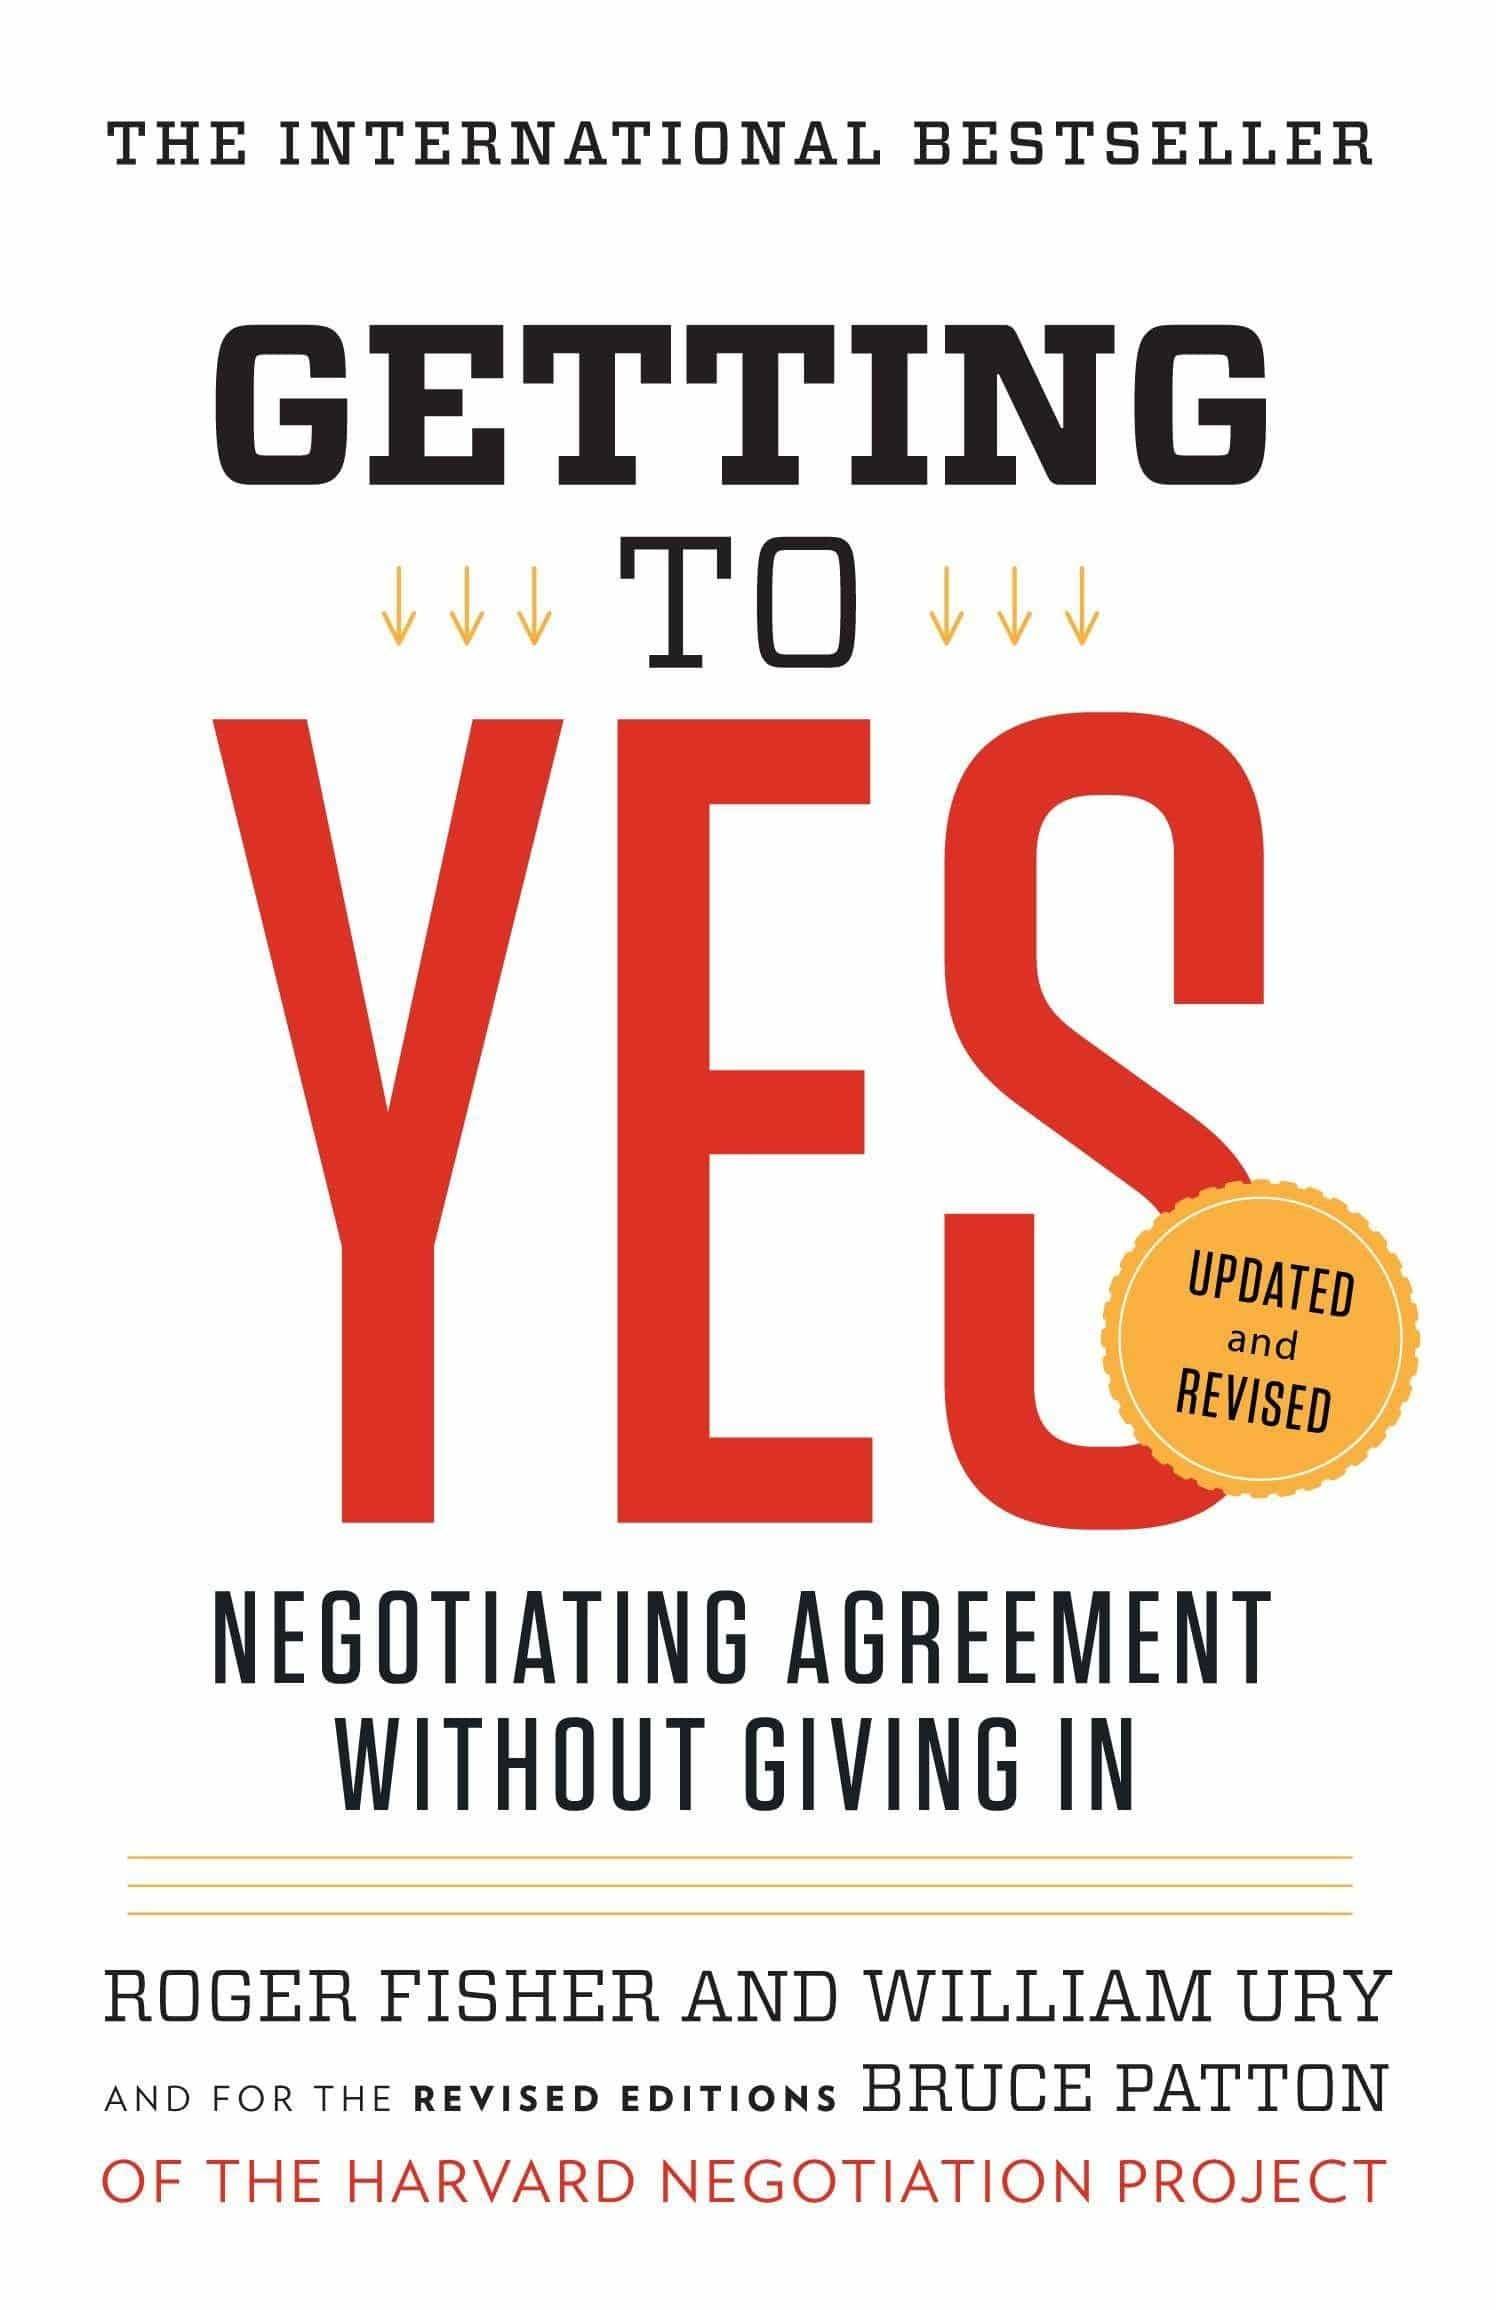 getting to yes roger ficher & william l.ury formation achats négociation